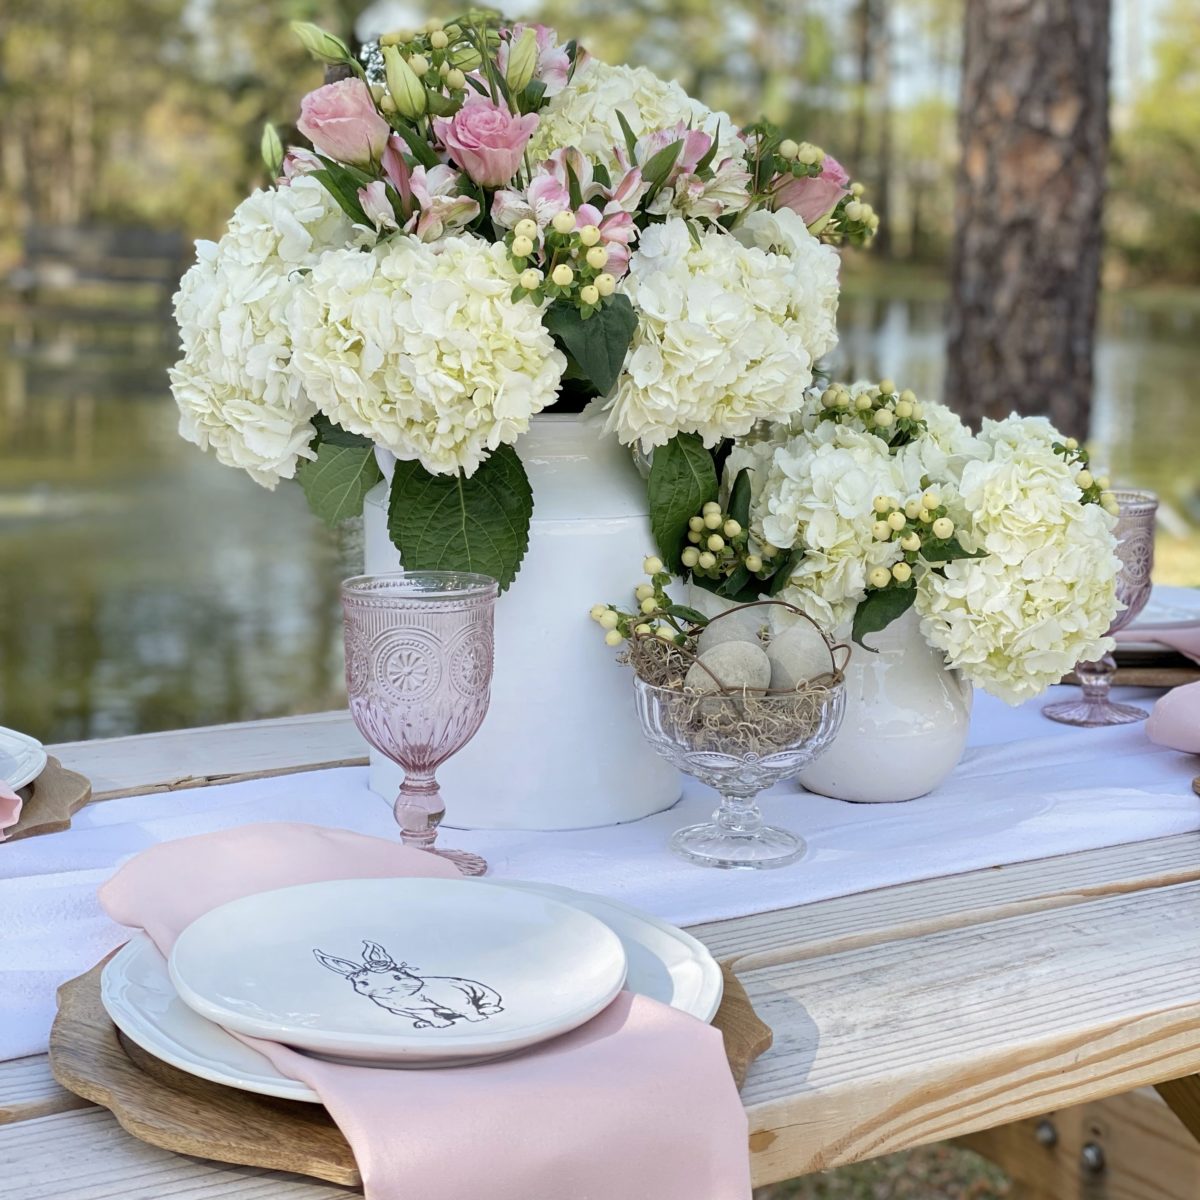 A simple spring table set with white dishes and pink accents on a picnic table by a pond,